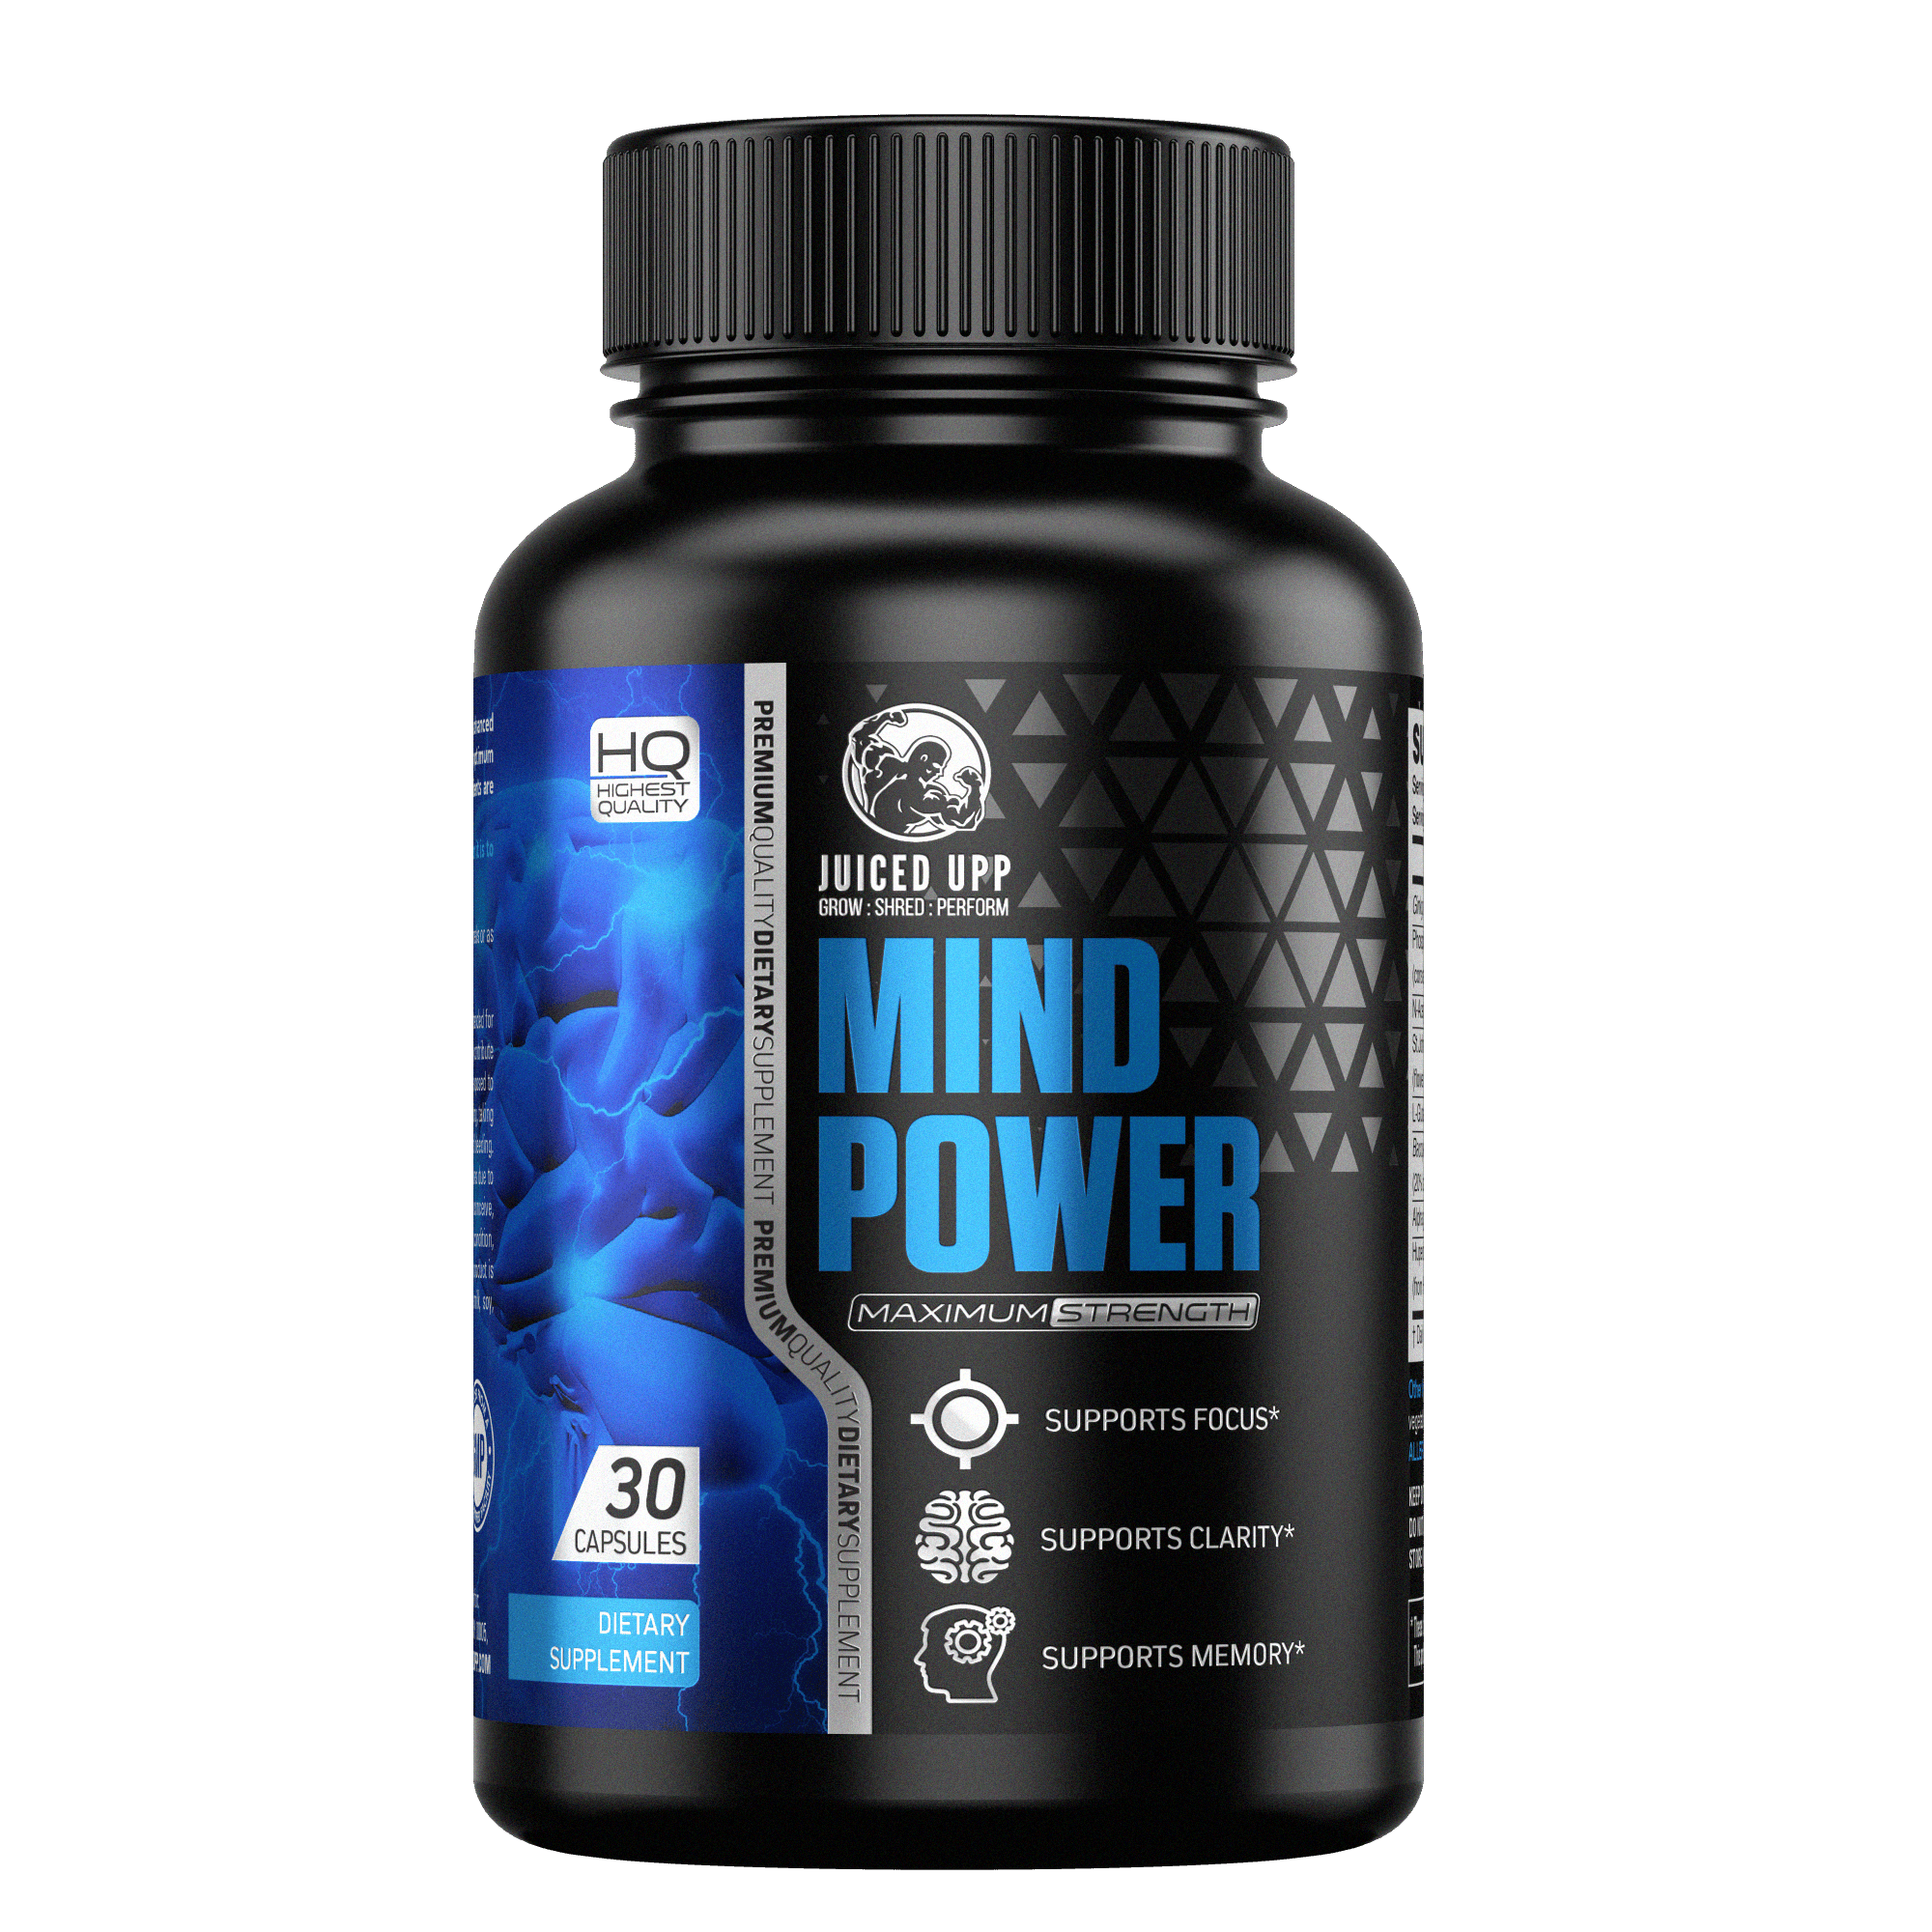 MIND POWER - Juiced Upp - 100% Natural Fitness and Wellbeing Supplements